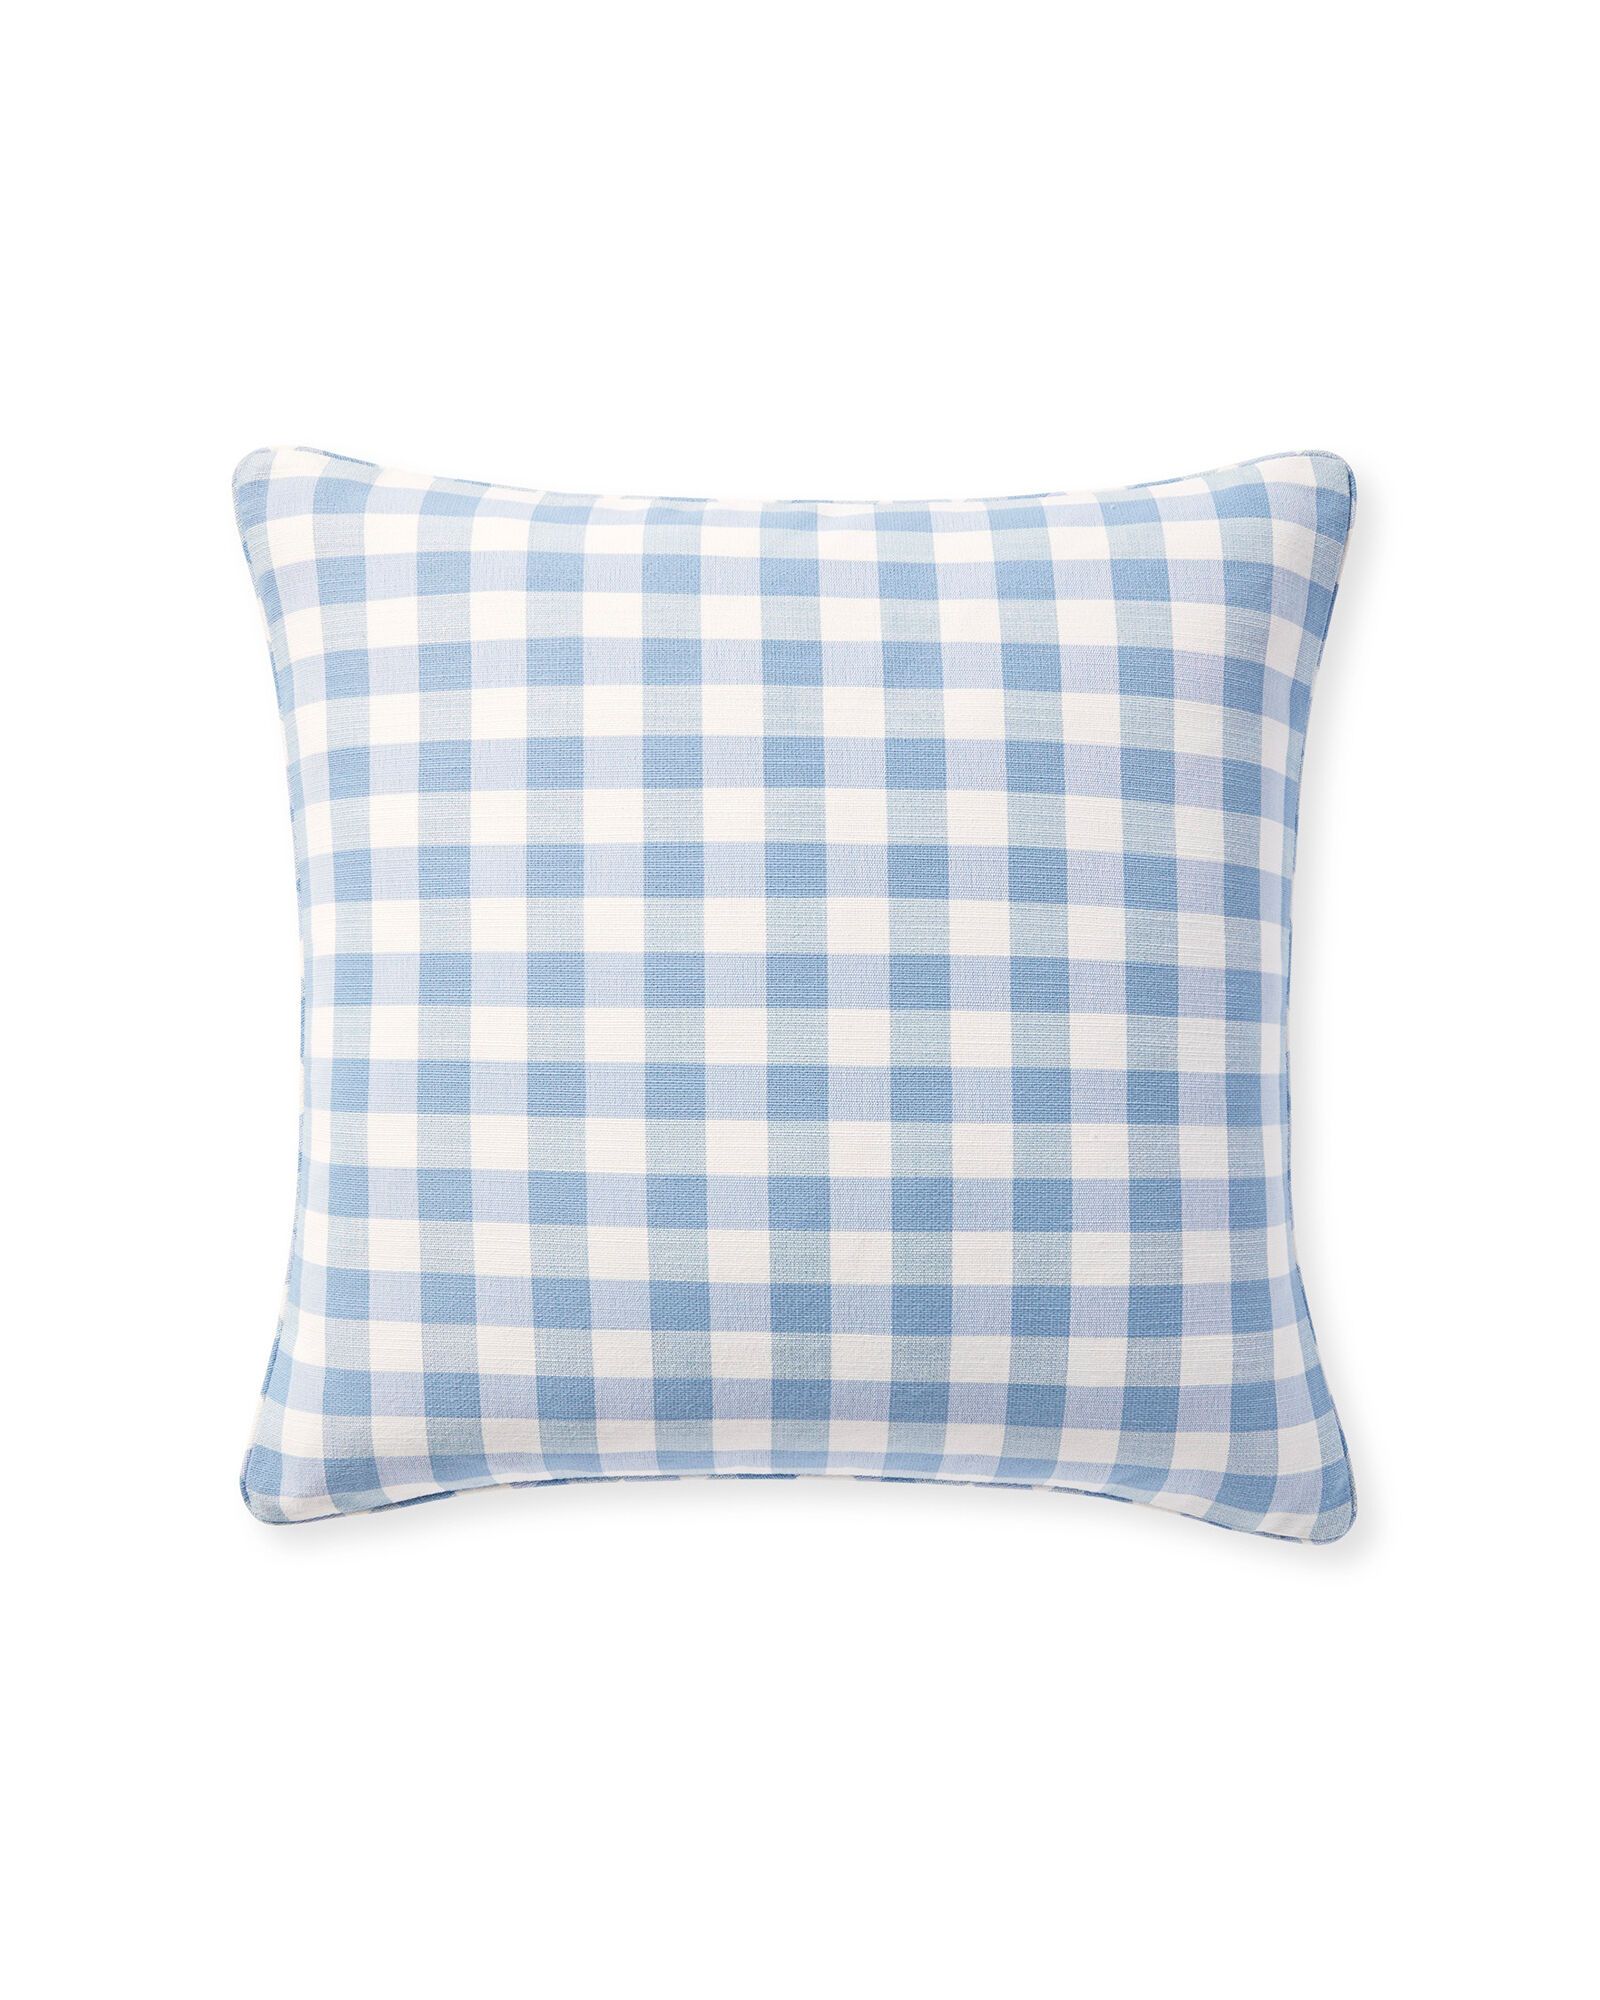 Perennials Classic Gingham Pillow Cover | Serena and Lily